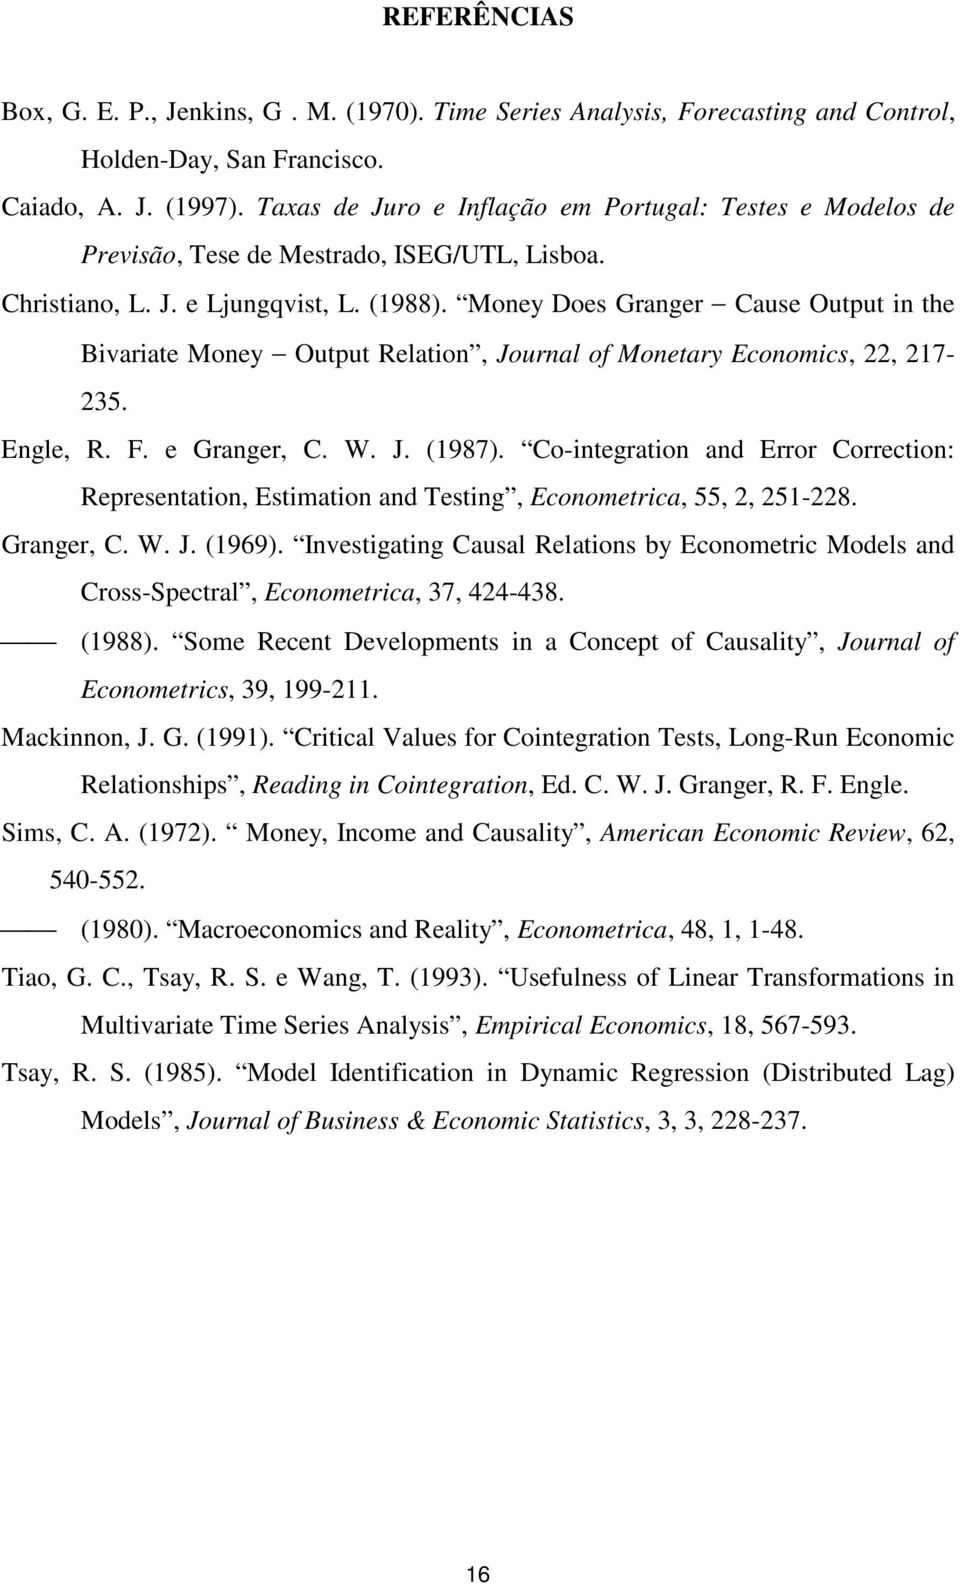 Money Does Granger Cause Oupu in he Bivariae Money Oupu Relaion, Journal of Moneary Economics, 22, 217-235. Engle, R. F. e Granger, C. W. J. (1987).